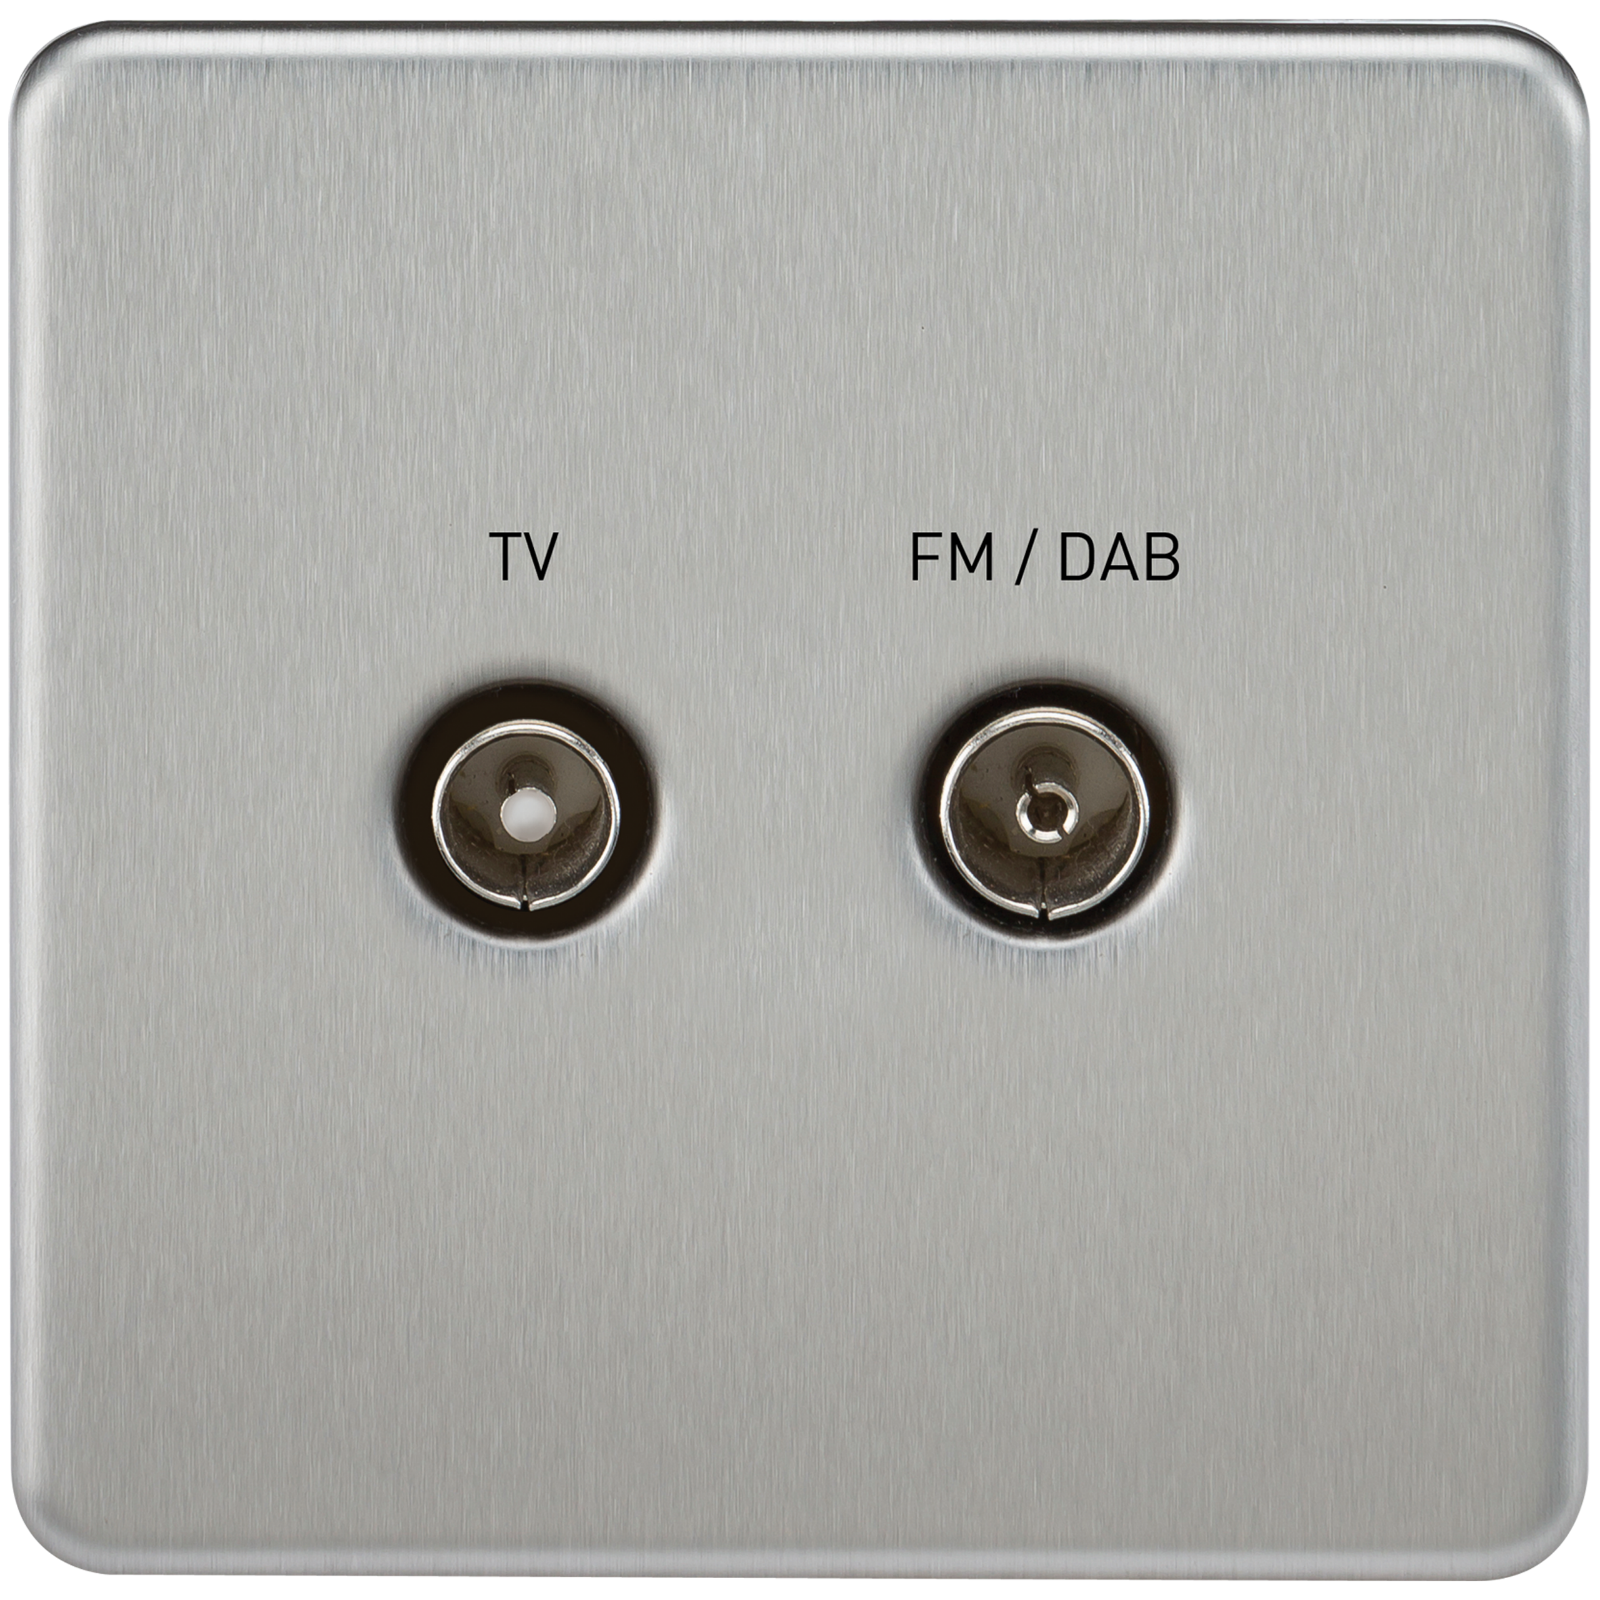 Screwless Screened Diplex Outlet (TV & FM DAB) - Brushed Chrome - SF0160BC 